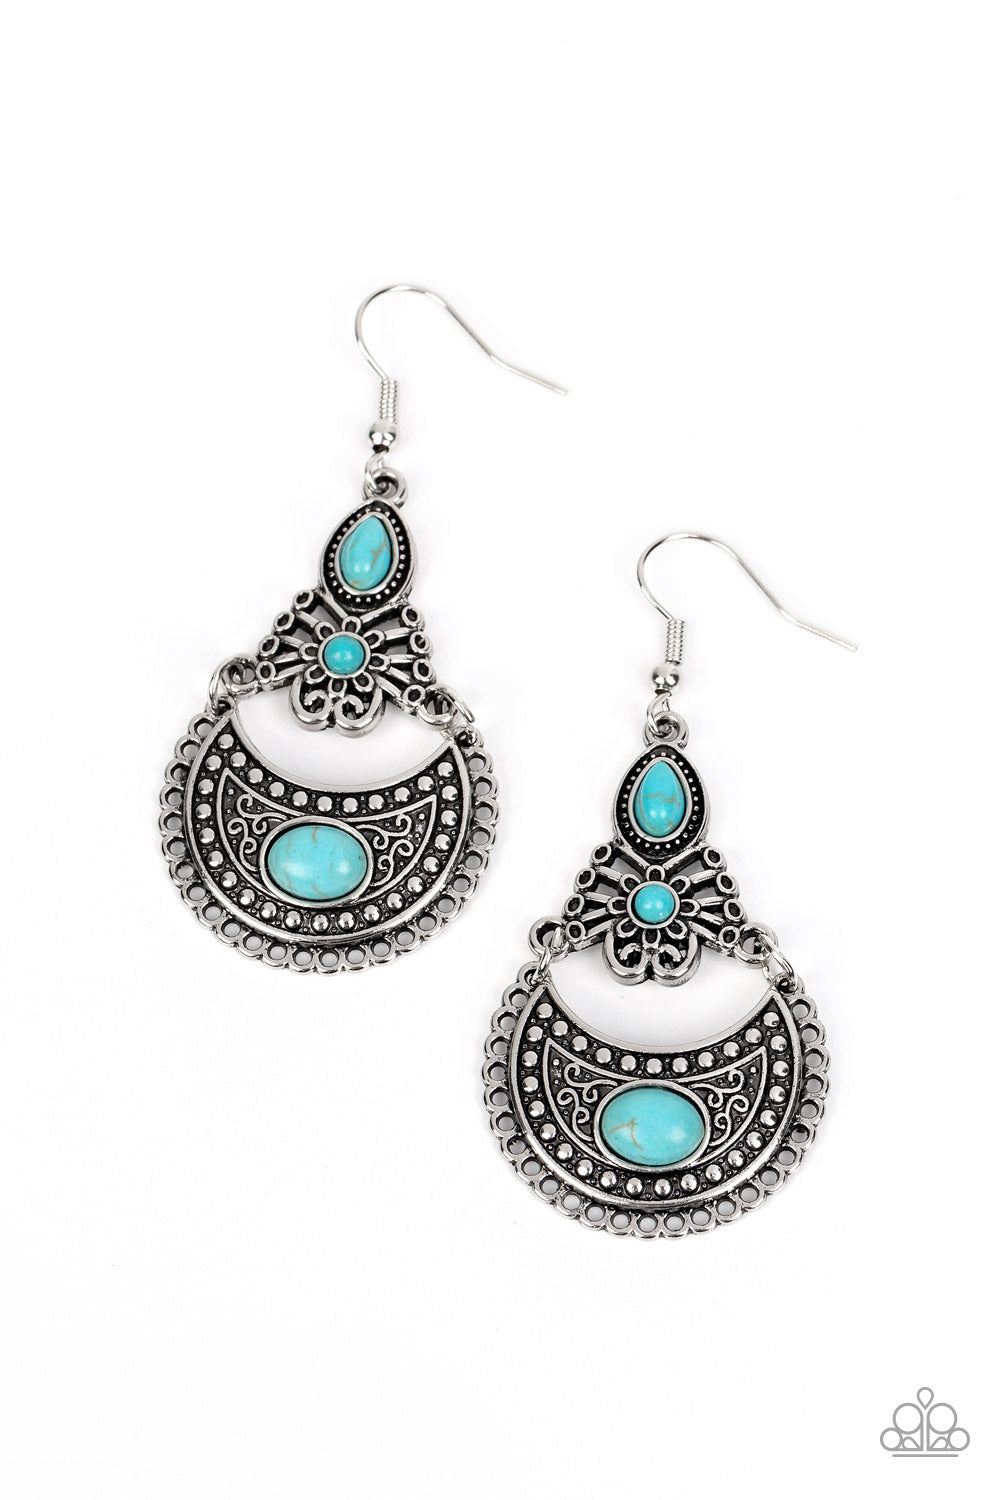 Sahara Samba - Blue Turquoise and Silver Earrings - Paparazzi Accessories - A dainty collection of teardrop, round and oval turquoise stones adorns the front of a decorative lure. Filled with frilly filigree and rustic silver studs, the mismatched frames delicately link into an artisan inspired centerpiece.